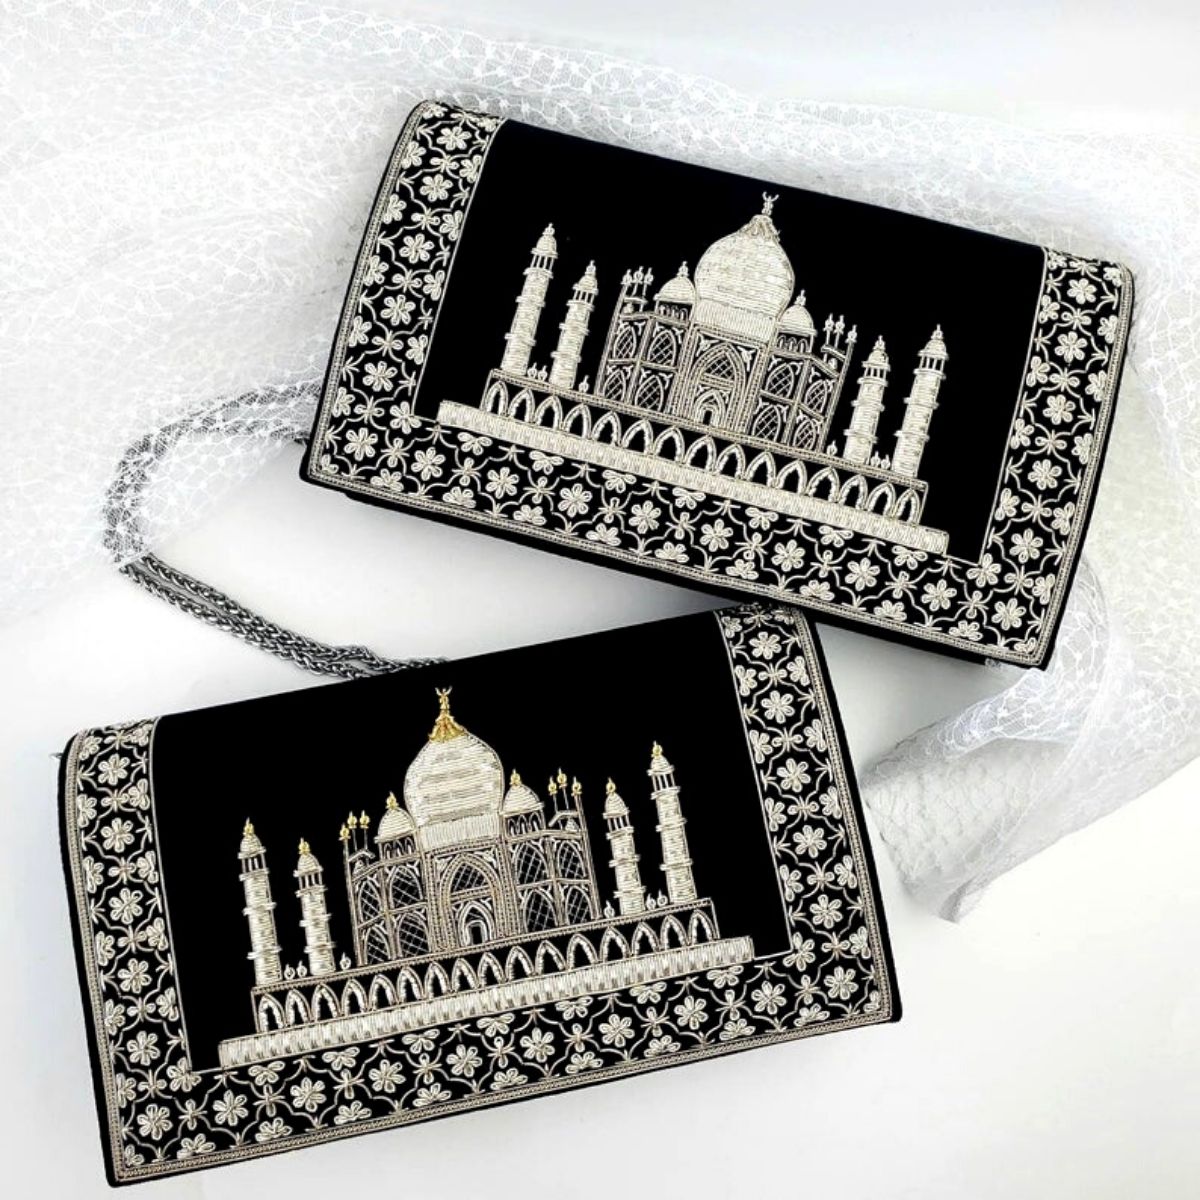 Two Taj Mahal handbags, one with gold accents, the other with silver accents.